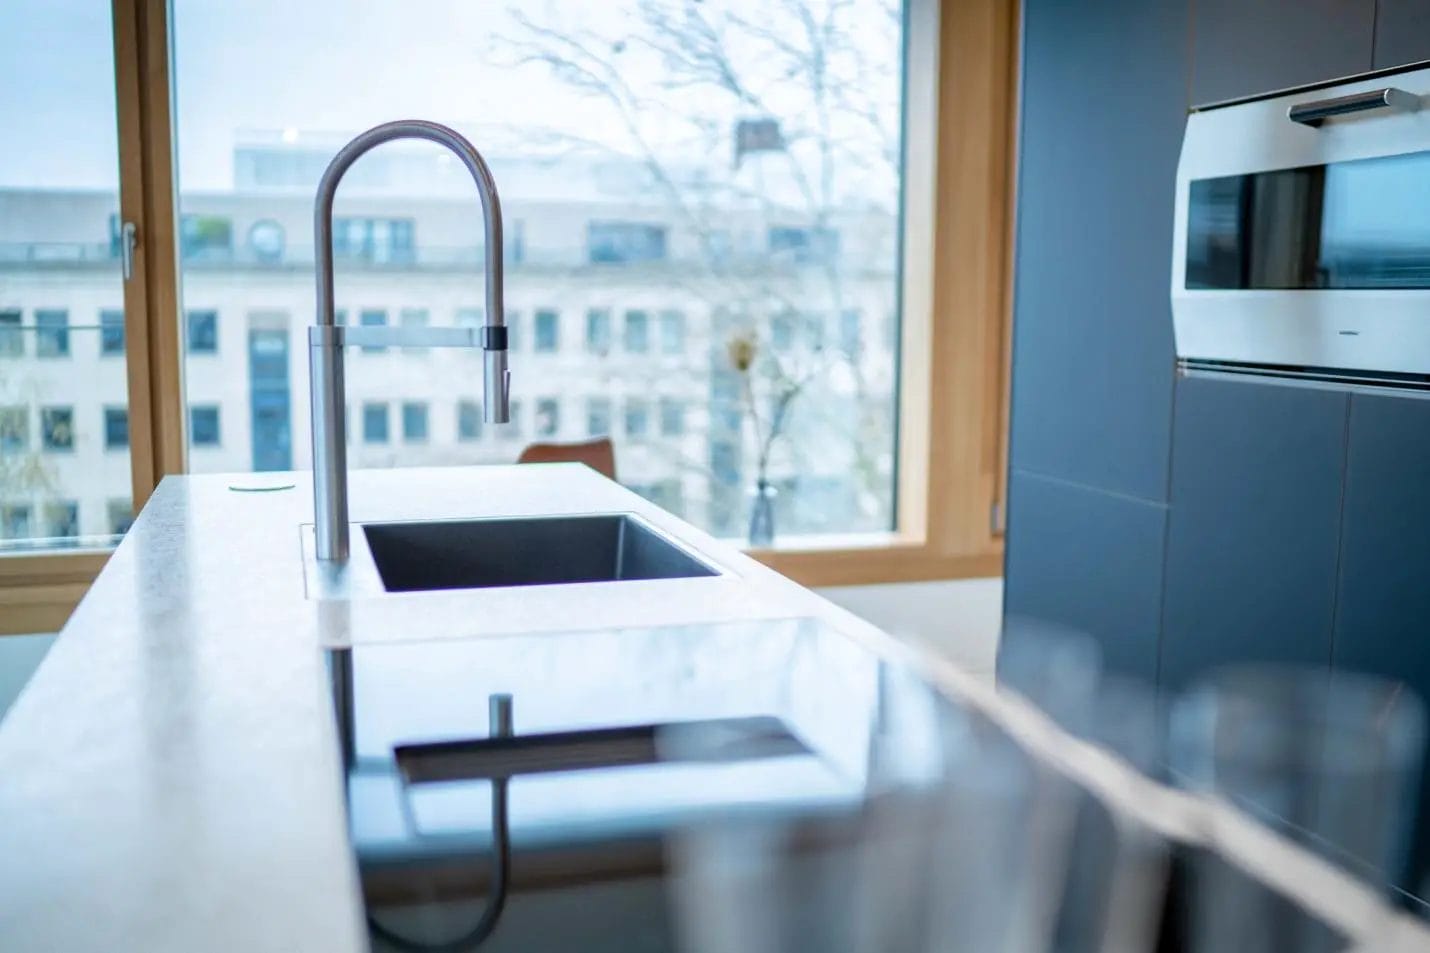 How to maintain your kitchen faucet